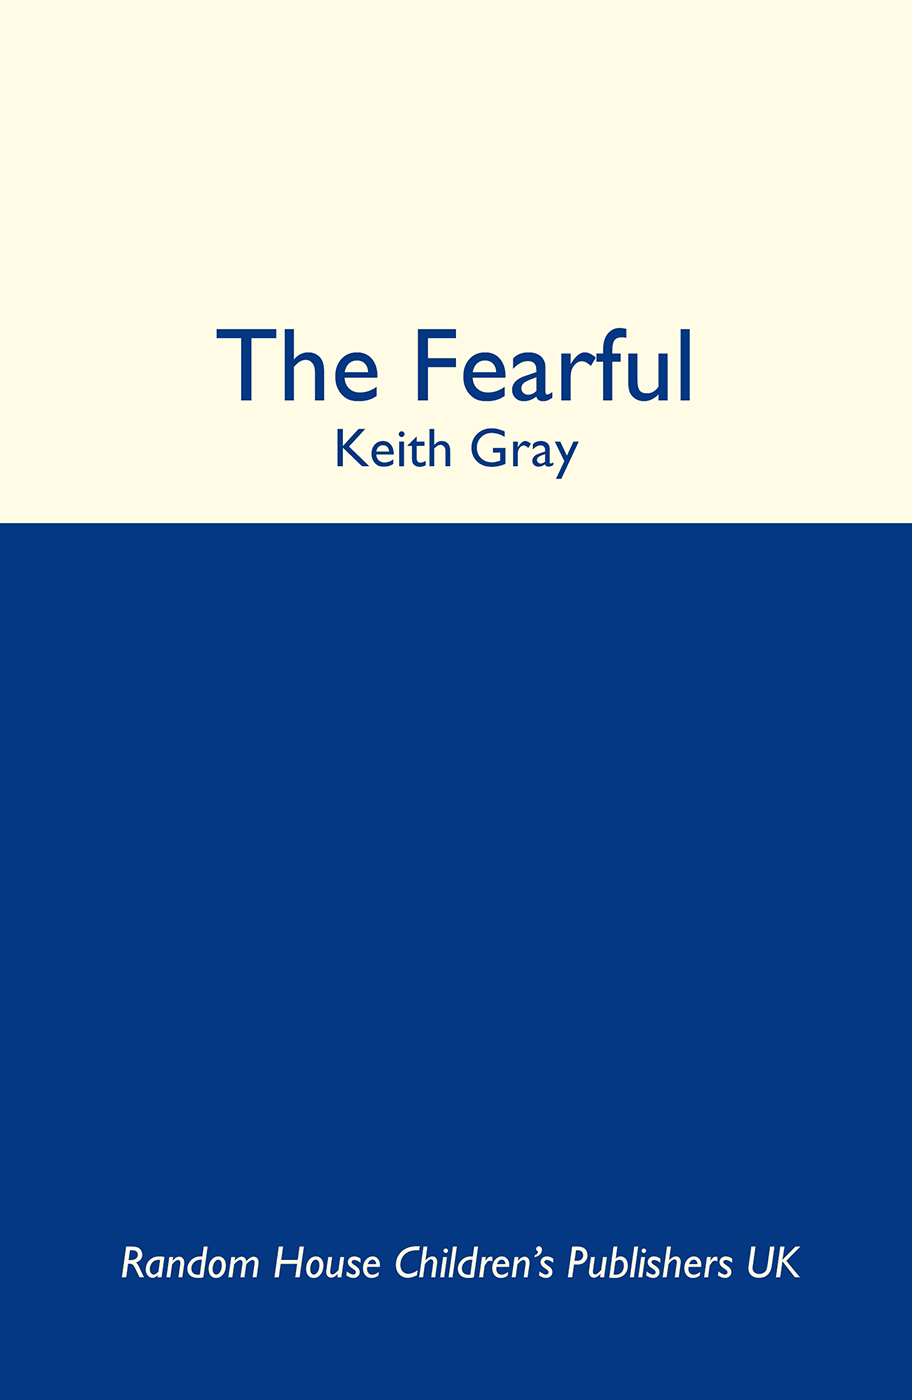 The Fearful (2006)